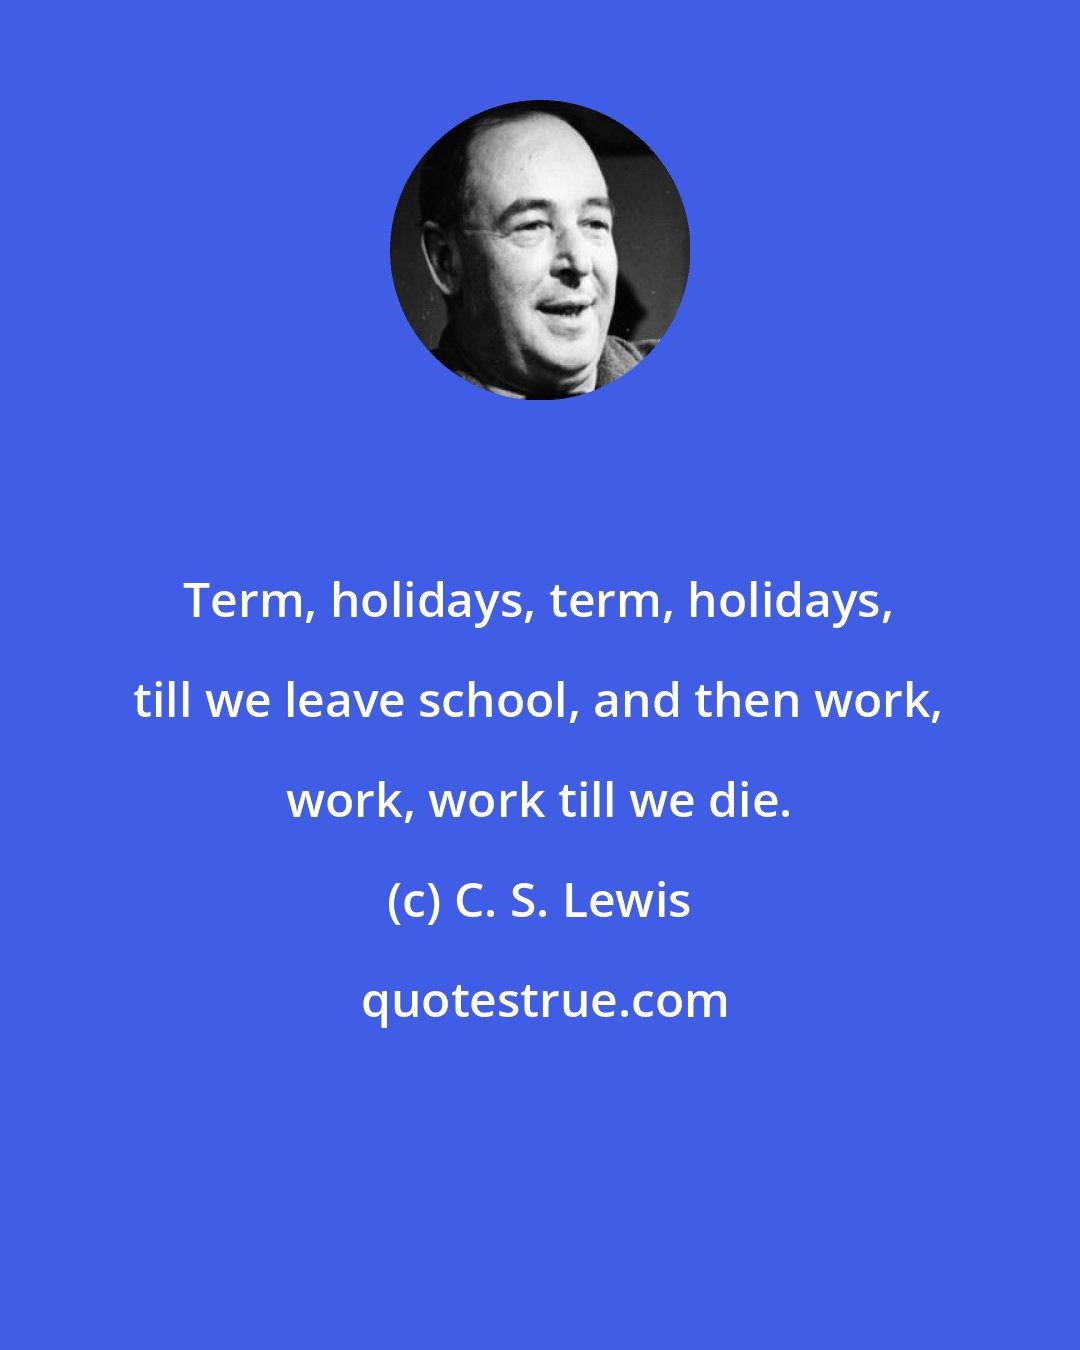 C. S. Lewis: Term, holidays, term, holidays, till we leave school, and then work, work, work till we die.